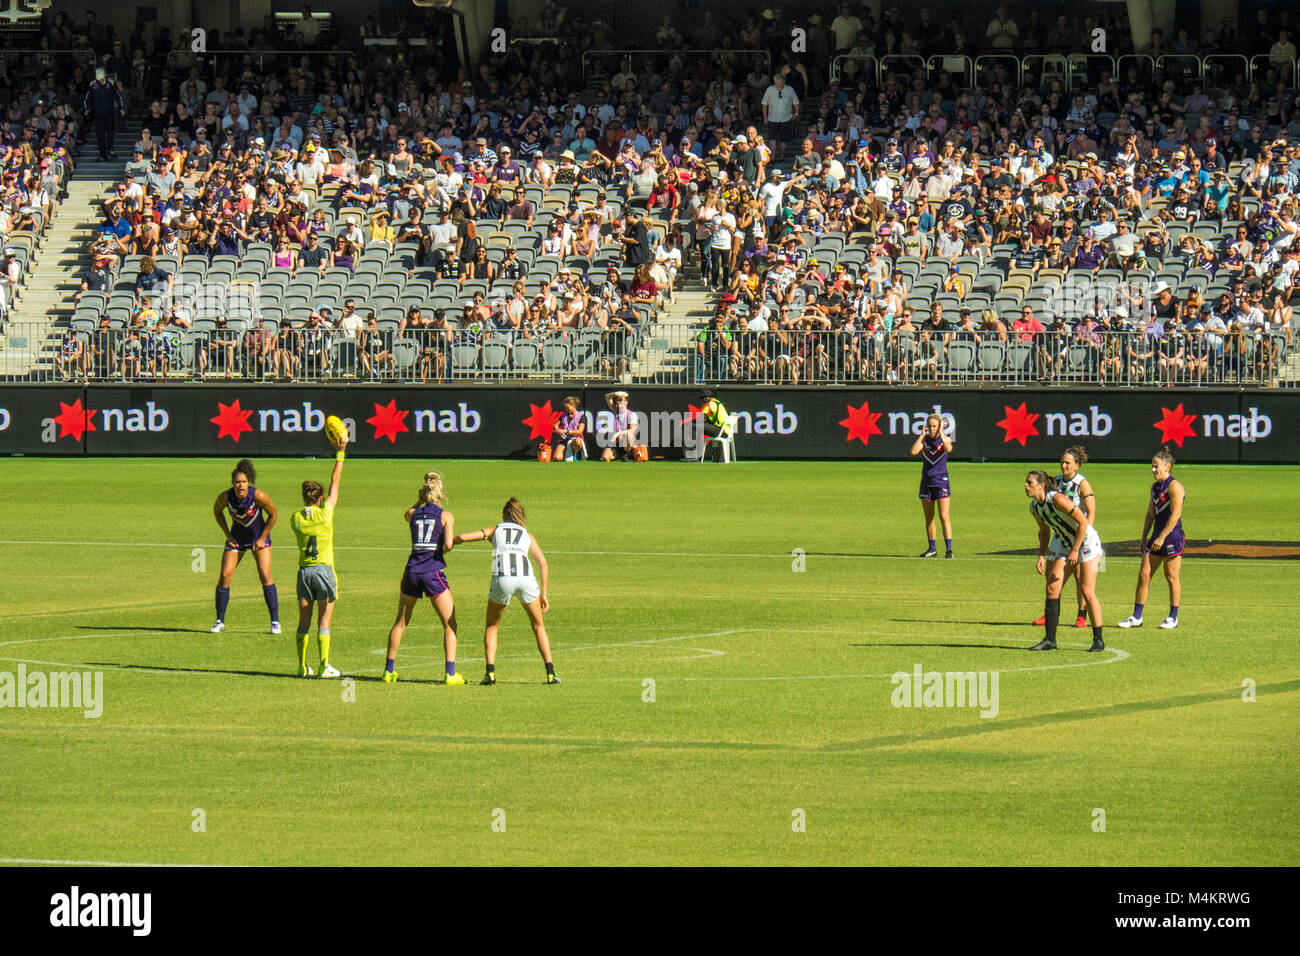 AFL Fremantle Football Club Women's team playing against Collingwood in front of a record attendance at Optus Stadium, Perth, WA, Australia. Stock Photo